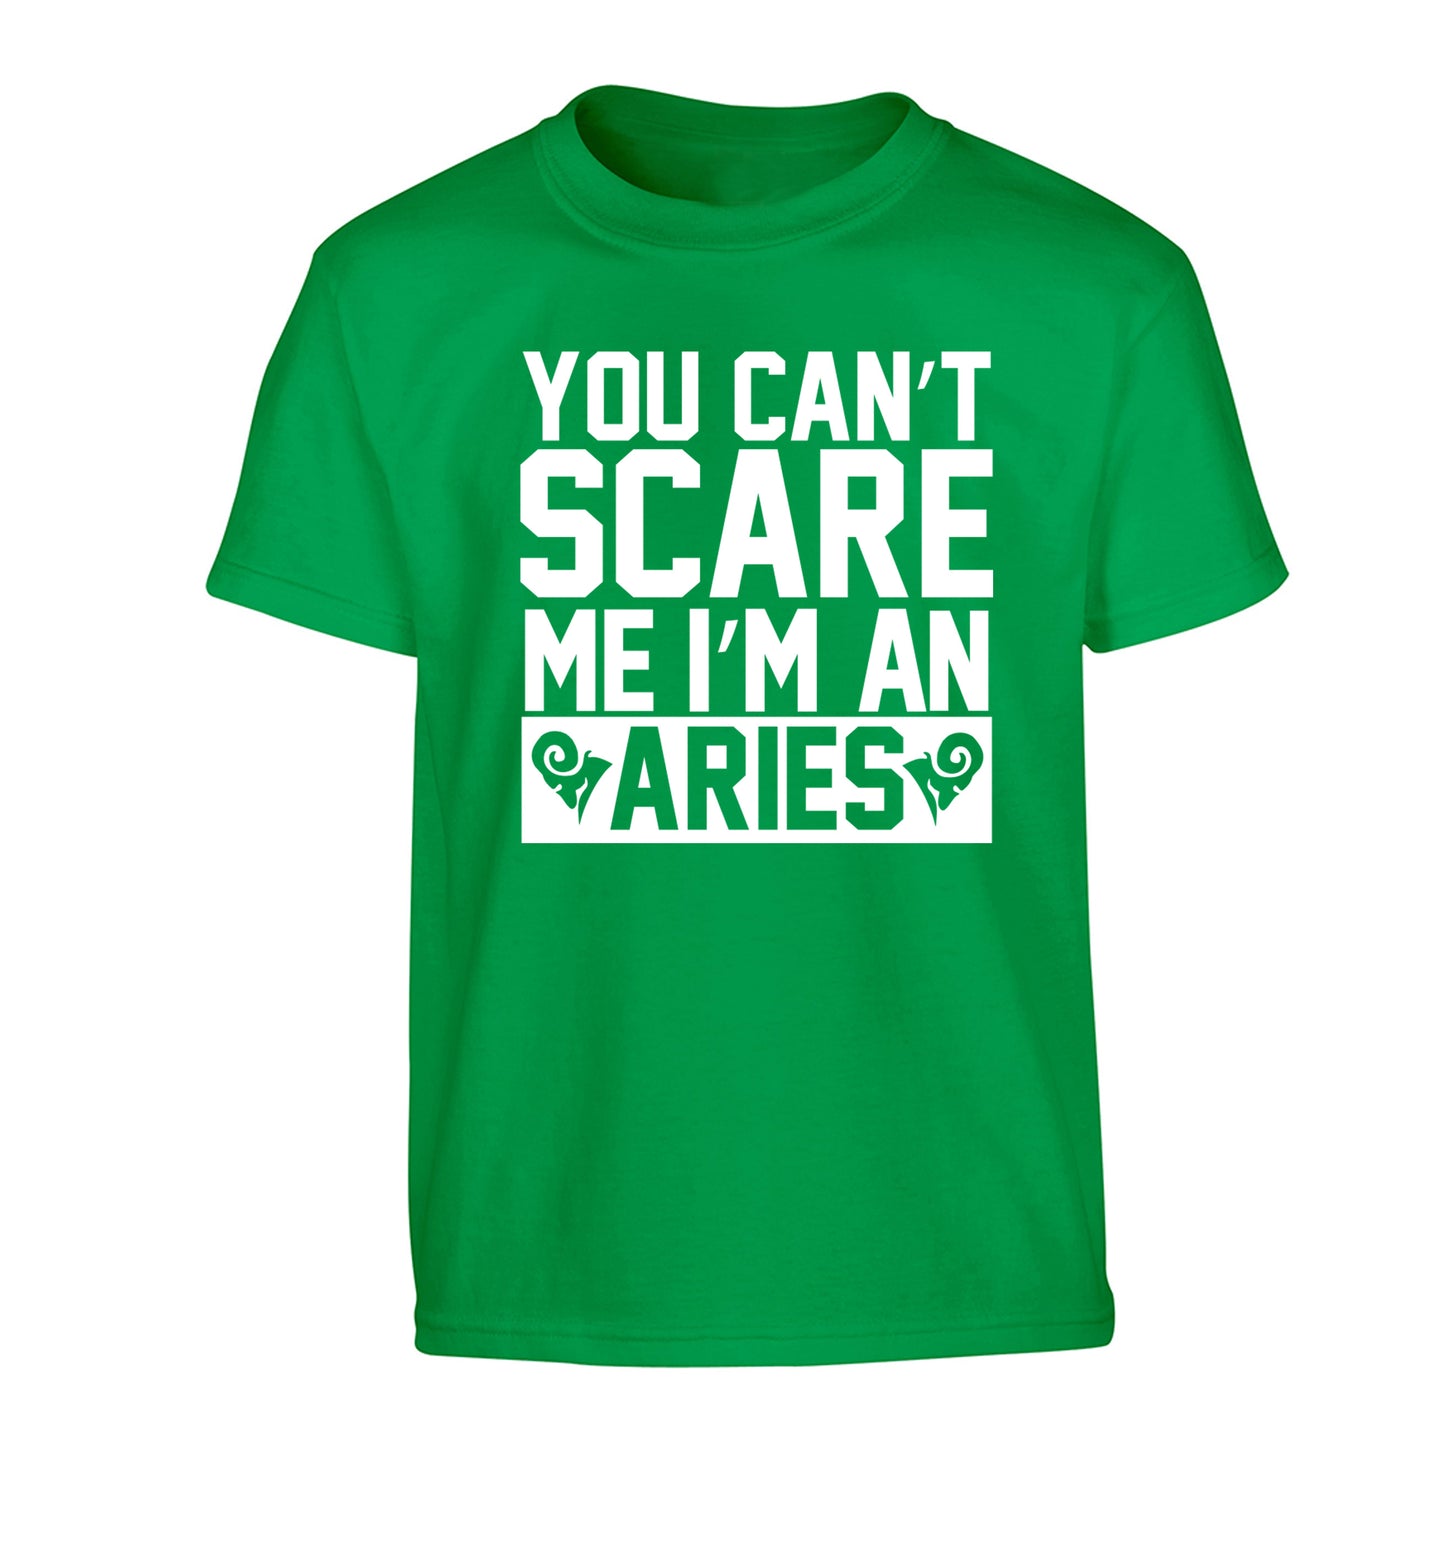 You can't scare me I'm an aries Children's green Tshirt 12-13 Years